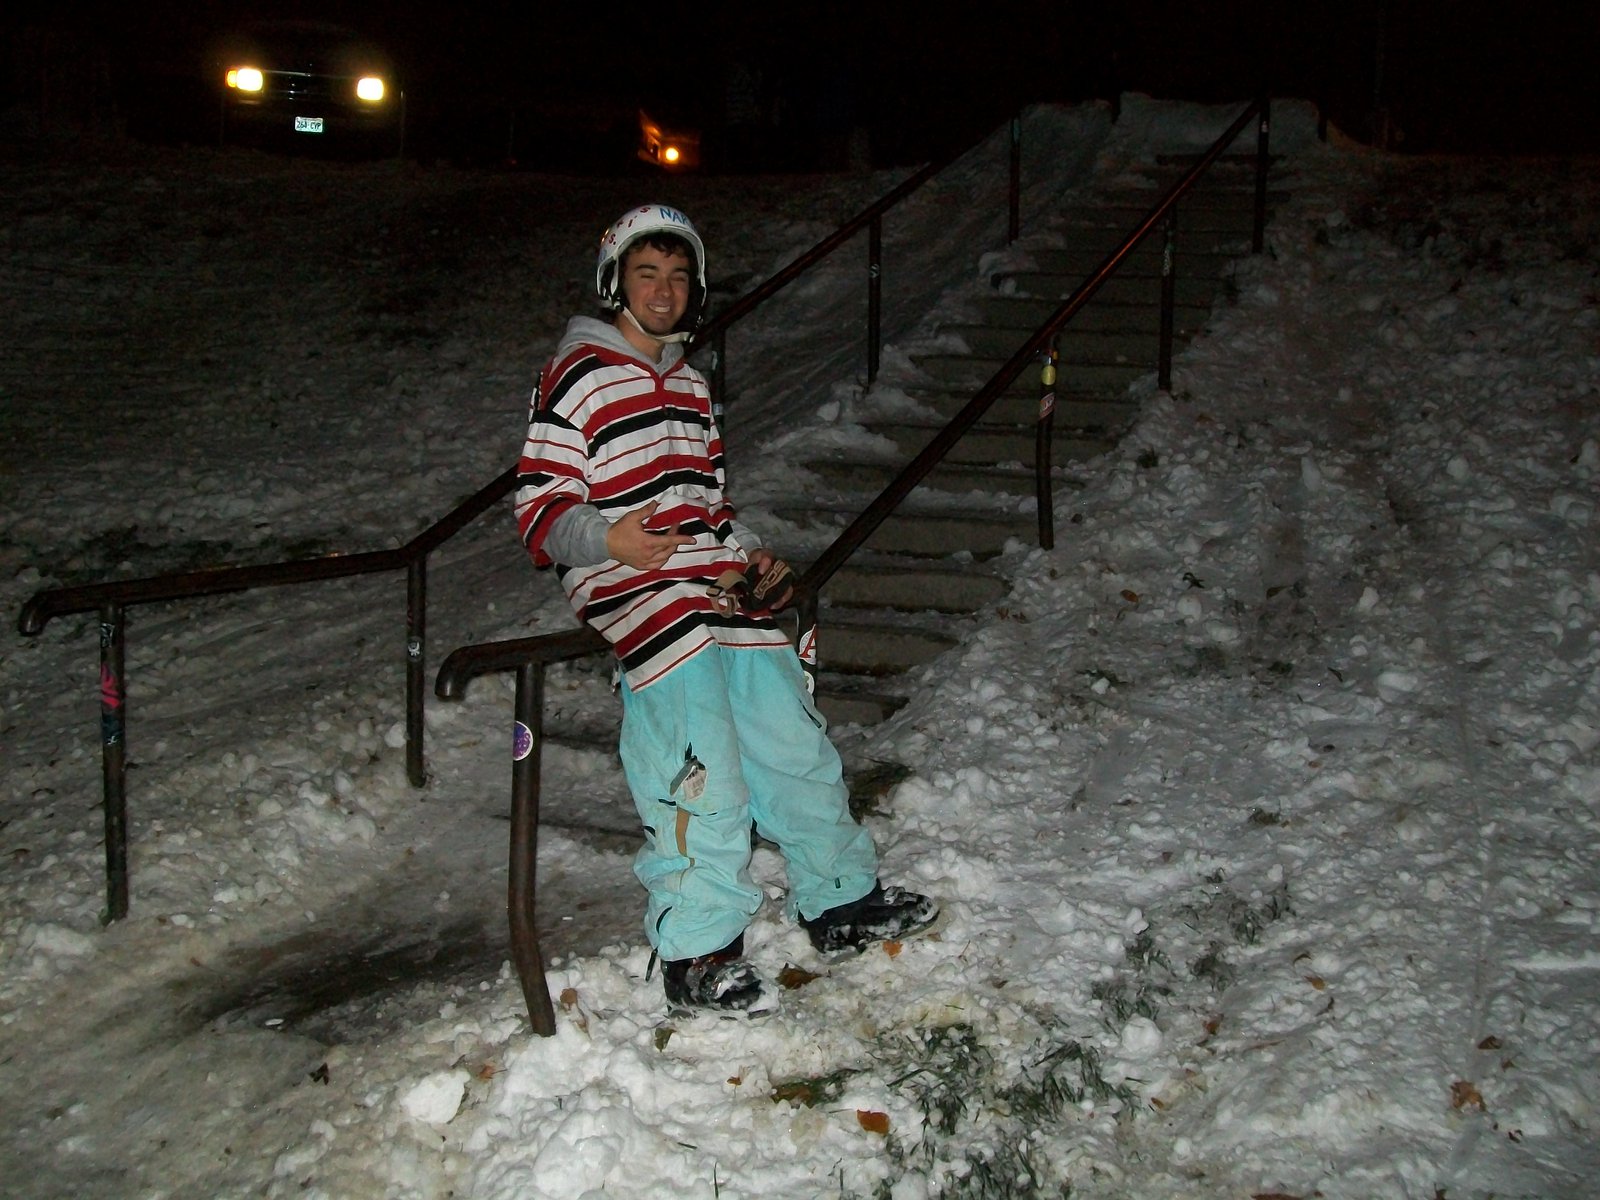 Just Chillen at a handrail